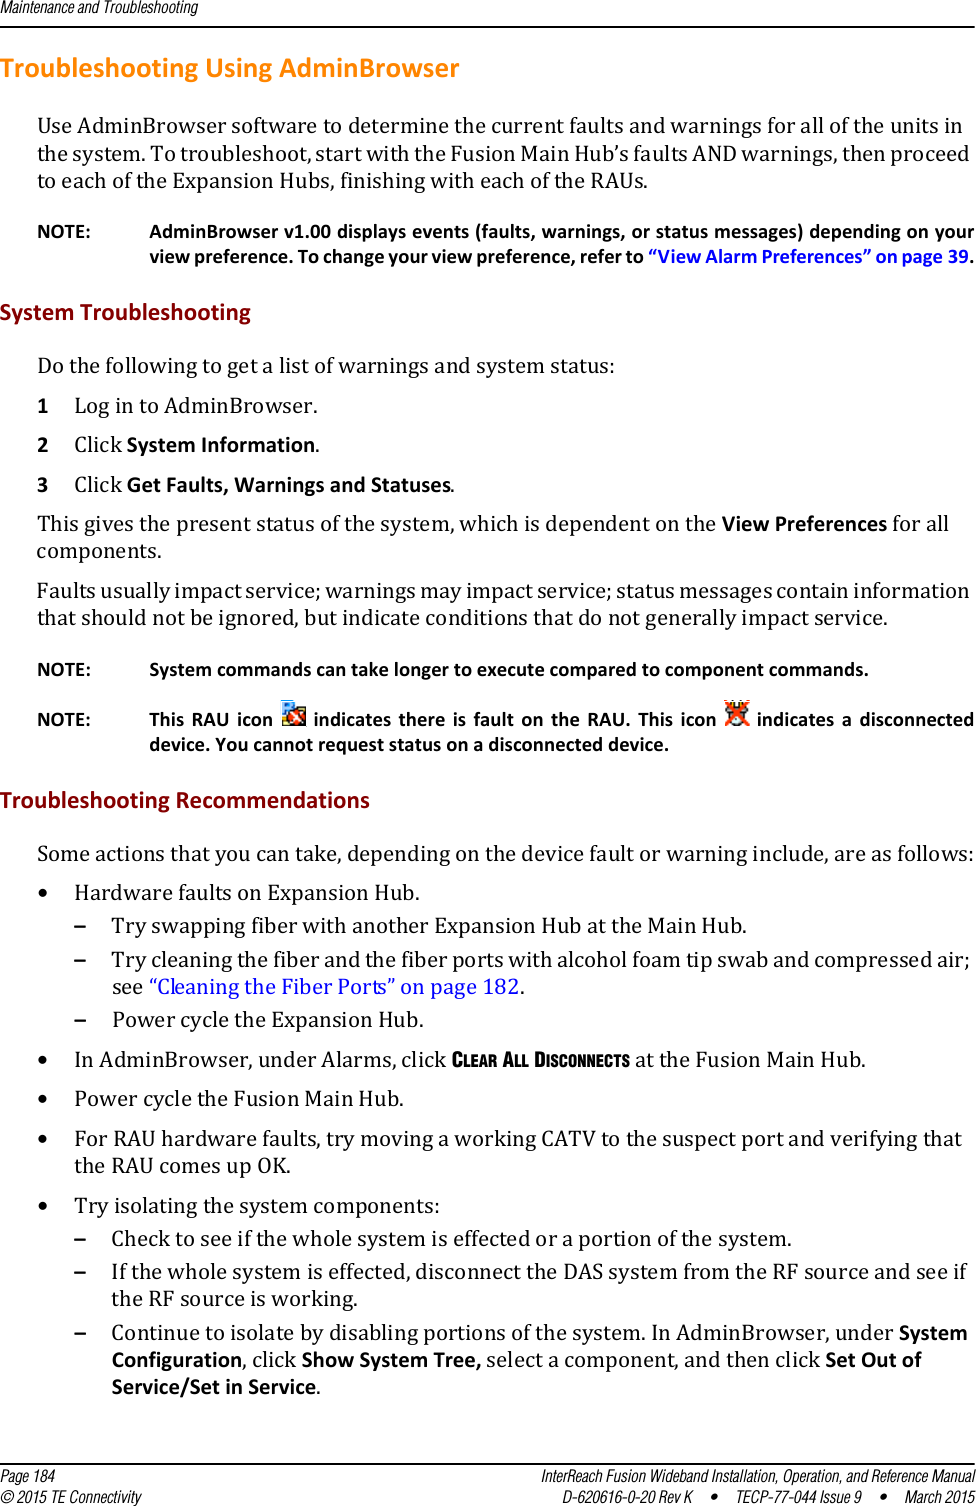 Maintenance and Troubleshooting  Page 184 InterReach Fusion Wideband Installation, Operation, and Reference Manual© 2015 TE Connectivity D-620616-0-20 Rev K  •  TECP-77-044 Issue 9  •  March 2015Troubleshooting Using AdminBrowserUse AdminBrowser software to determine the current faults and warnings for all of the units in the system. To troubleshoot, start with the Fusion Main Hub’s faults AND warnings, then proceed to each of the Expansion Hubs, finishing with each of the RAUs.NOTE: AdminBrowser v1.00 displays events (faults, warnings, or status messages) depending on your view preference. To change your view preference, refer to “View Alarm Preferences” on page 39.System TroubleshootingDo the following to get a list of warnings and system status:1Log in to AdminBrowser.2Click System Information.3Click Get Faults, Warnings and Statuses. This gives the present status of the system, which is dependent on the View Preferences for all components.Faults usually impact service; warnings may impact service; status messages contain information that should not be ignored, but indicate conditions that do not generally impact service.NOTE: System commands can take longer to execute compared to component commands.NOTE: This RAU icon   indicates there is fault on the RAU. This icon   indicates a disconnected device. You cannot request status on a disconnected device.Troubleshooting RecommendationsSome actions that you can take, depending on the device fault or warning include, are as follows:•Hardware faults on Expansion Hub. –Try swapping fiber with another Expansion Hub at the Main Hub. –Try cleaning the fiber and the fiber ports with alcohol foam tip swab and compressed air; see “Cleaning the Fiber Ports” on page 182.–Power cycle the Expansion Hub.•In AdminBrowser, under Alarms, click CLEAR ALL DISCONNECTS at the Fusion Main Hub.•Power cycle the Fusion Main Hub.•For RAU hardware faults, try moving a working CATV to the suspect port and verifying that the RAU comes up OK.•Try isolating the system components:–Check to see if the whole system is effected or a portion of the system.–If the whole system is effected, disconnect the DAS system from the RF source and see if the RF source is working.–Continue to isolate by disabling portions of the system. In AdminBrowser, under System Configuration, click Show System Tree, select a component, and then click Set Out of Service/Set in Service.